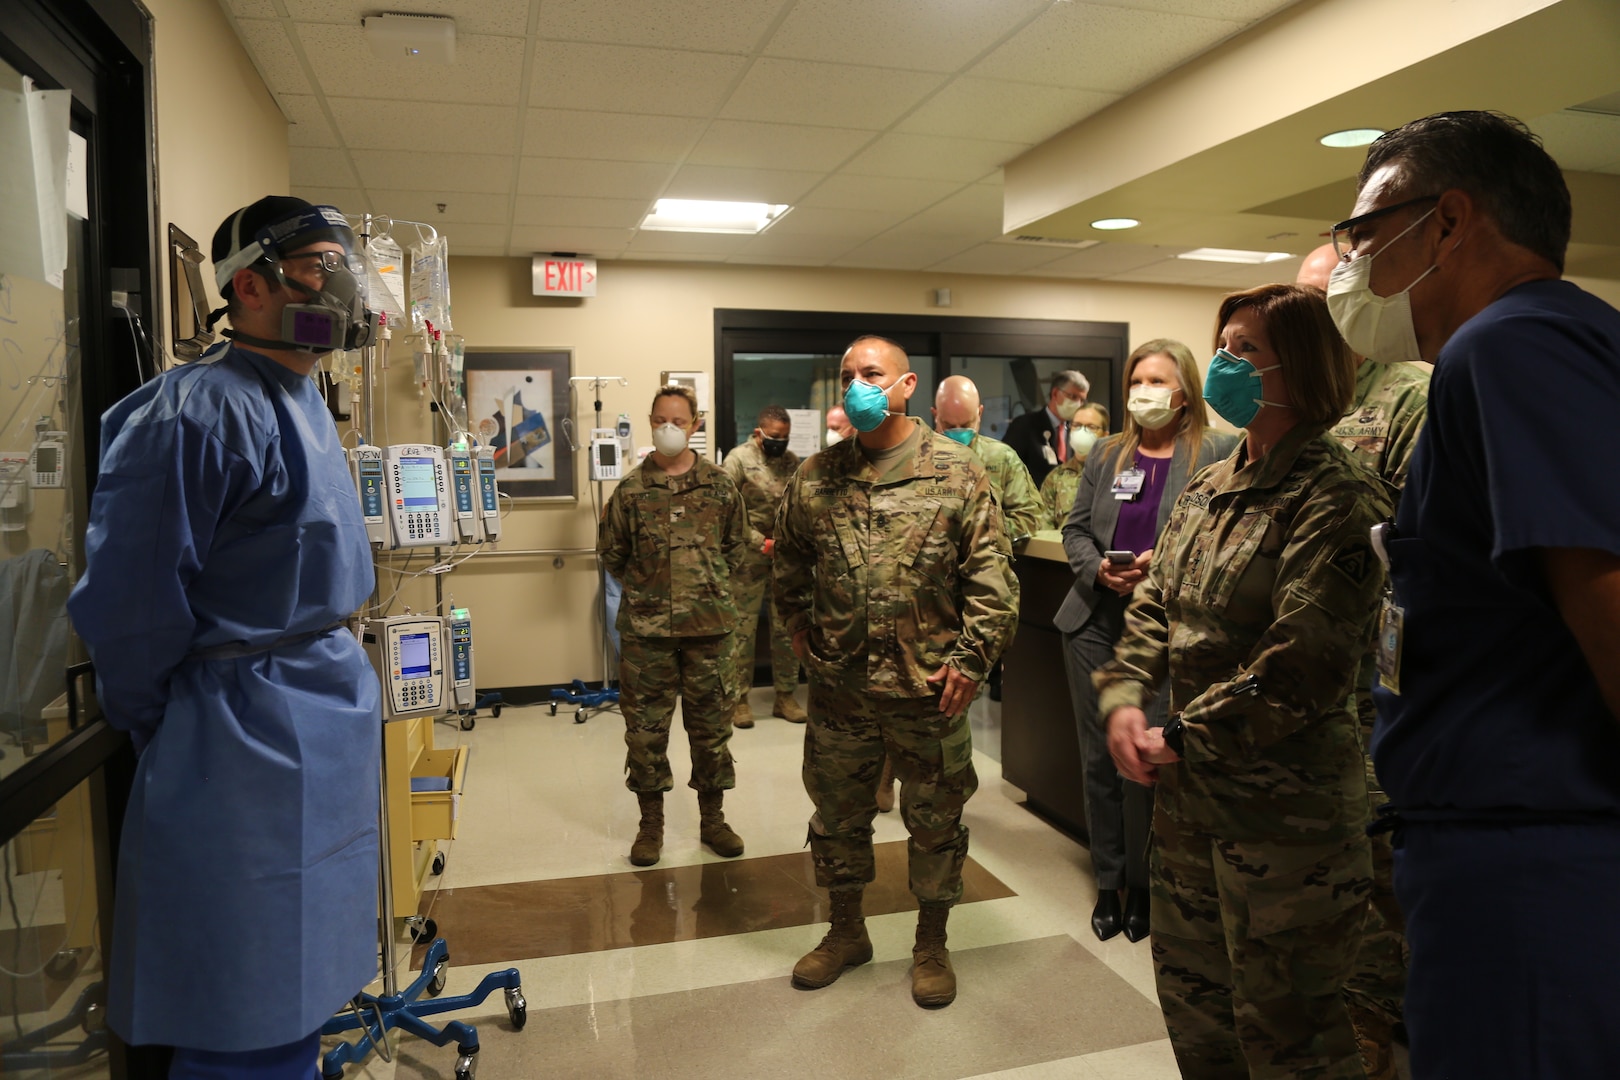 Medical personnel speaking with military personnel in a medical center.